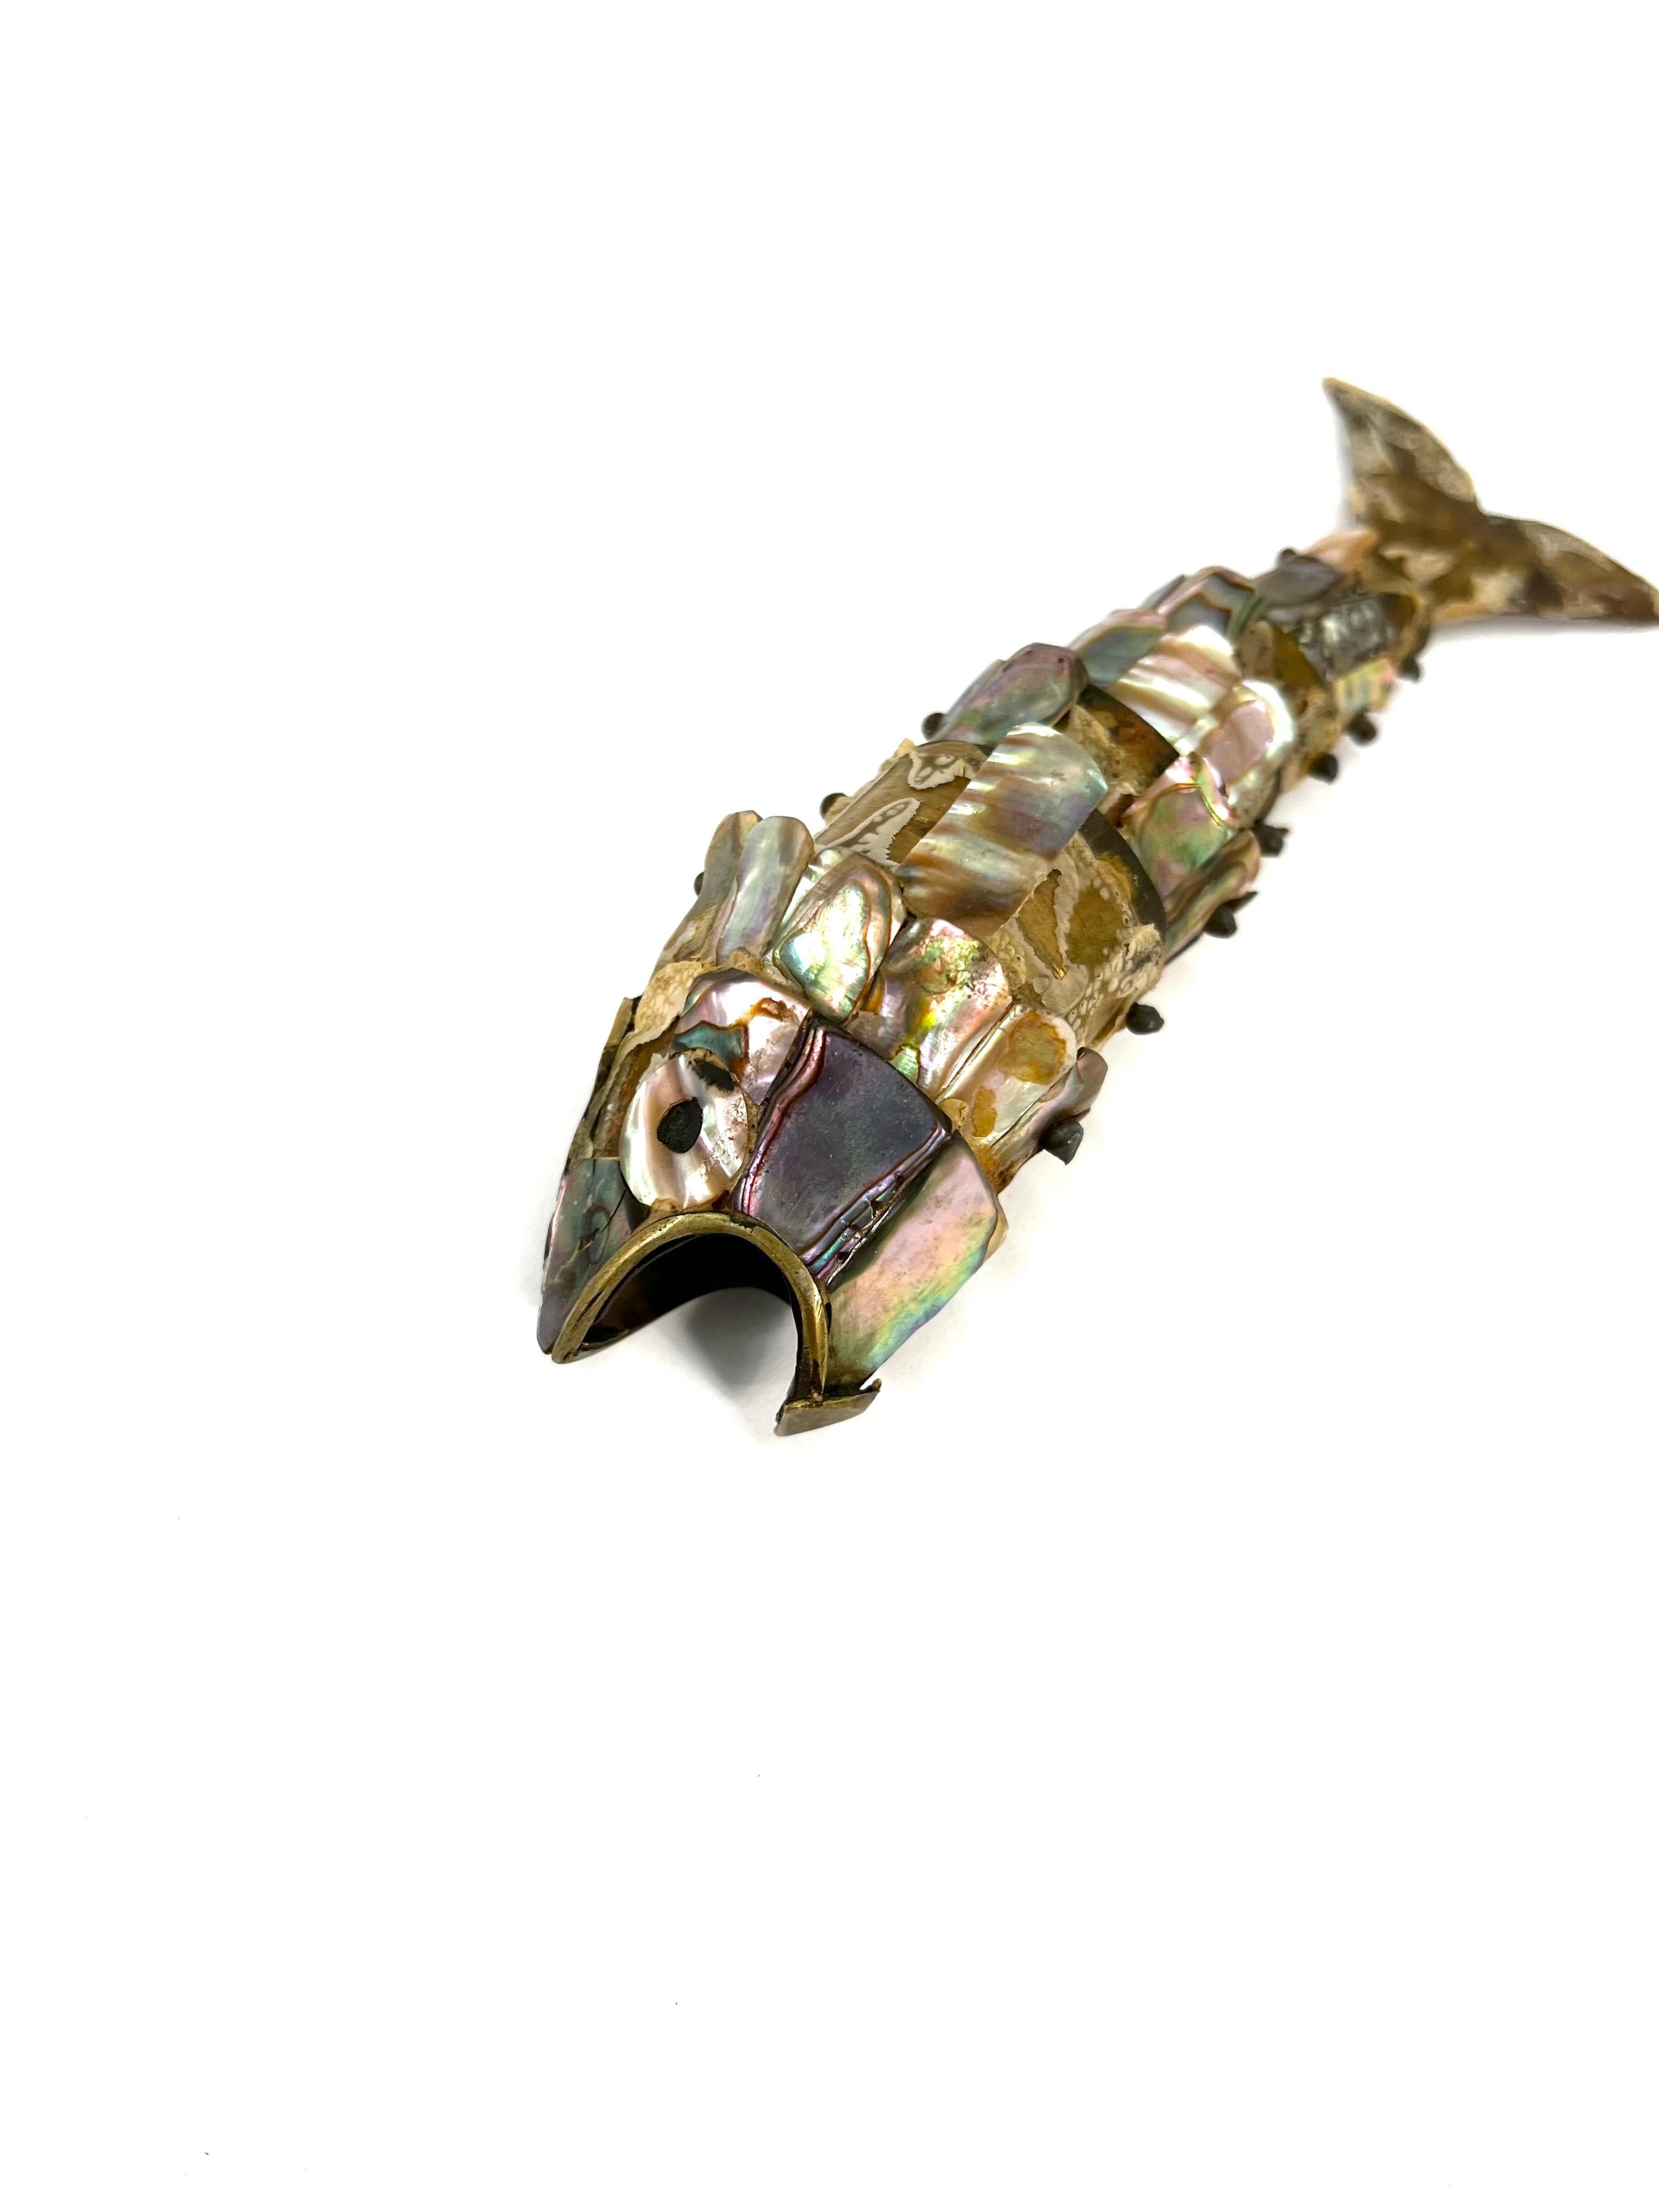 20th Century Mexican Fish Bottle Opener with Abalone Shells